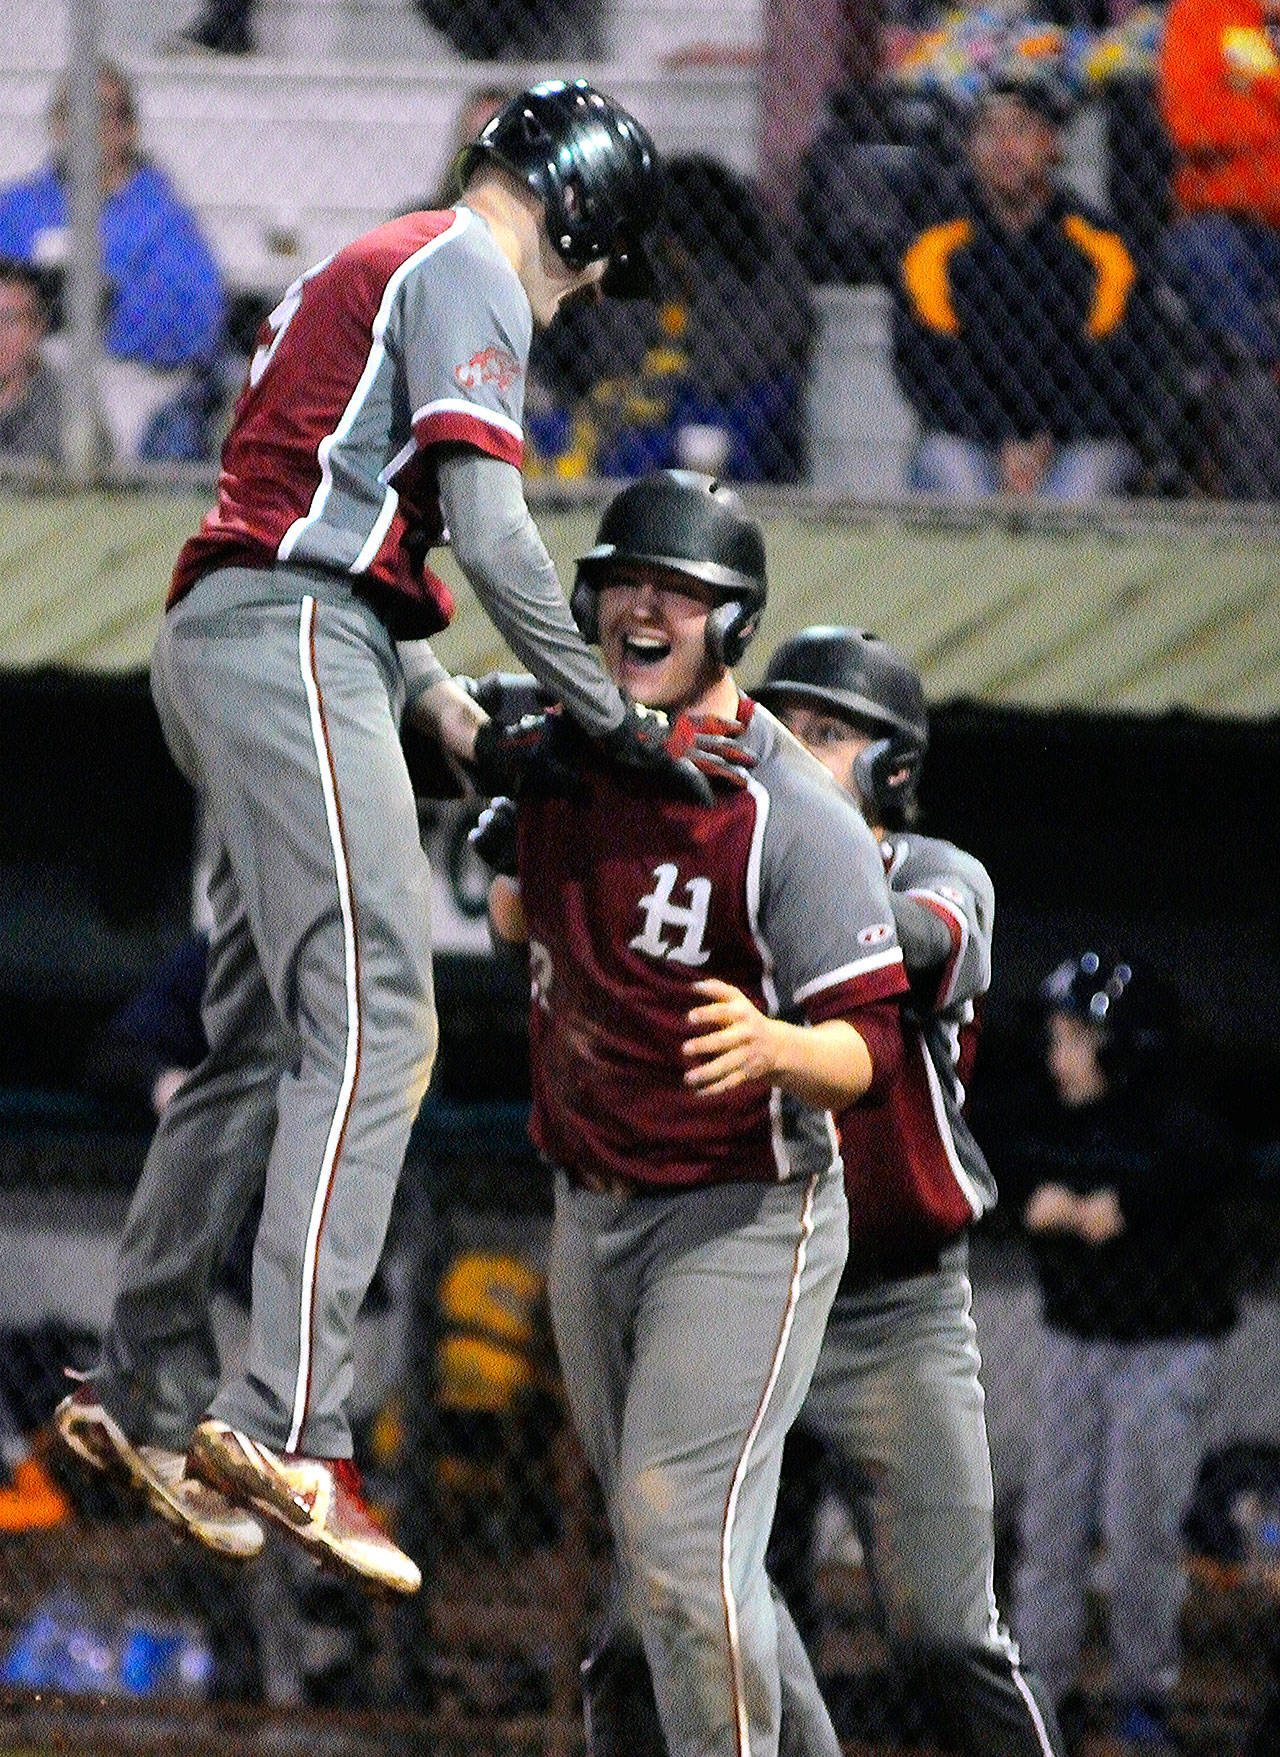 Hoquiam’s Kyle Larsen, left, celebrates with Liam Odell after Larsen scored the game-winning run against Aberdeen on Wednesday. (Hasani Grayson | Grays Harbor News Group)